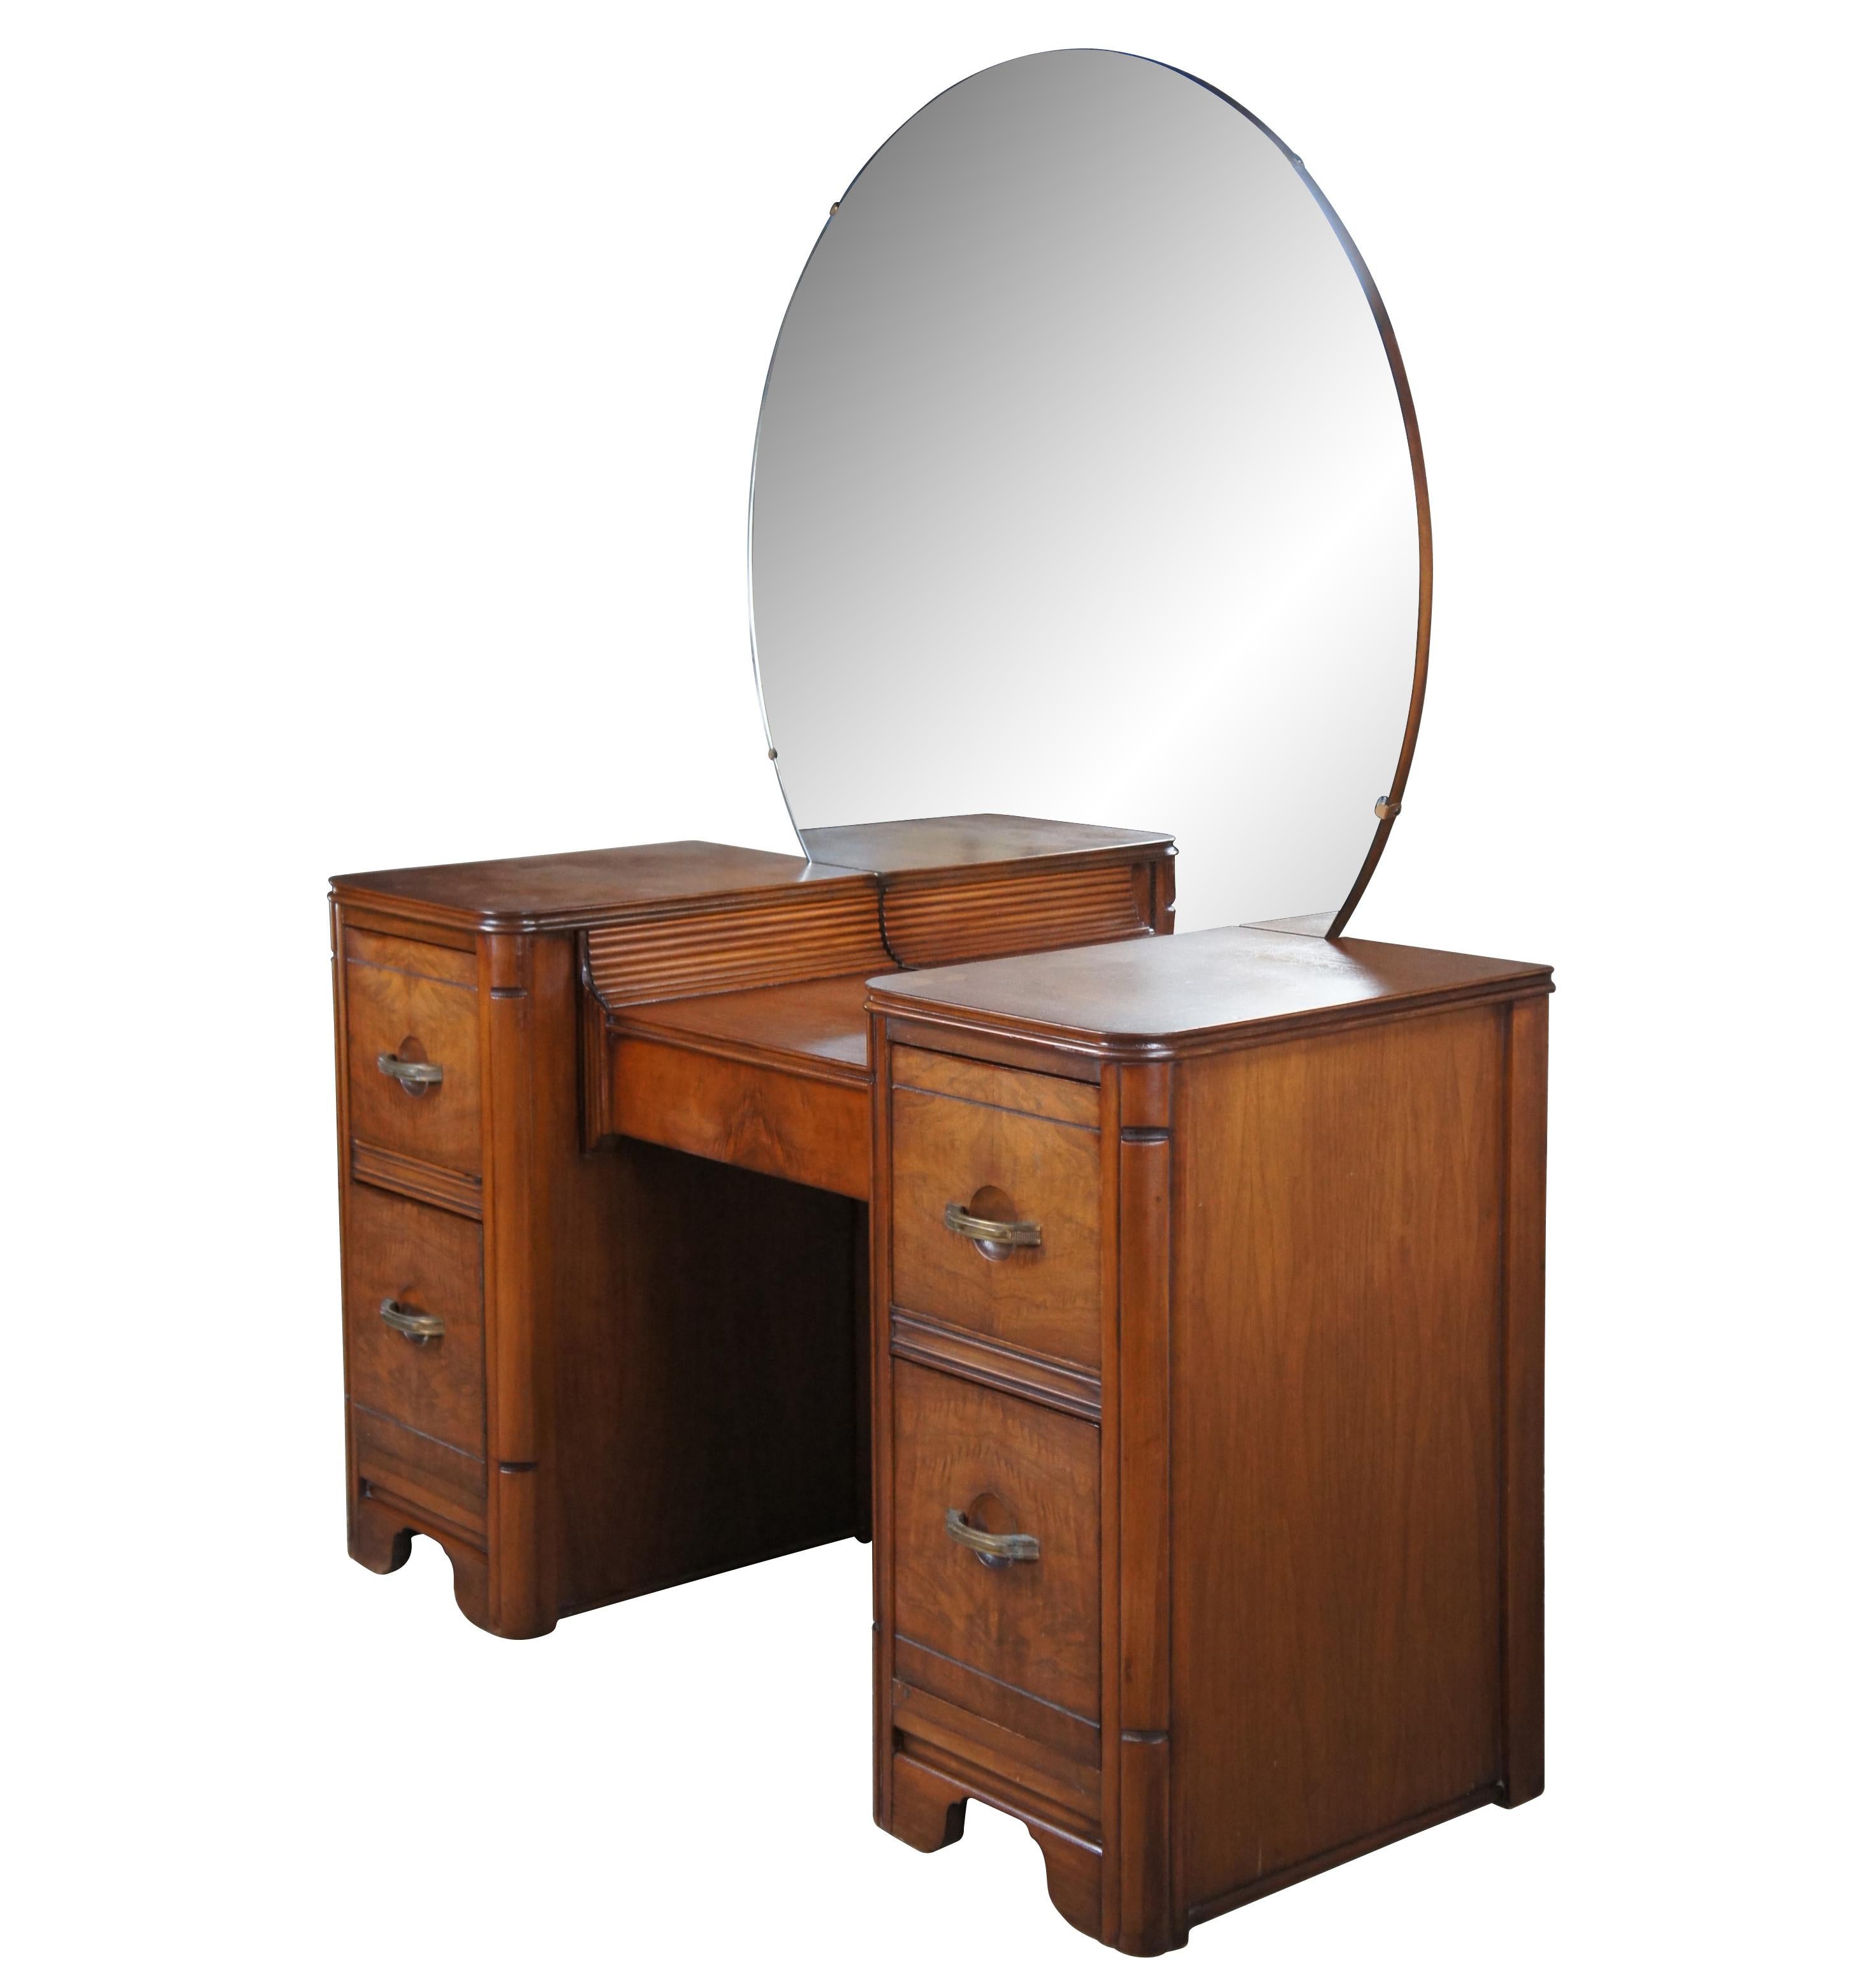 An impressive late Art Deco vanity or dressing table. Made from walnut with matchbook drawer fronts and round mirror with beveled edge. Includes four dovetailed drawers having unique concave impressions and shapely brass drawer pulls. Marked B 296-8